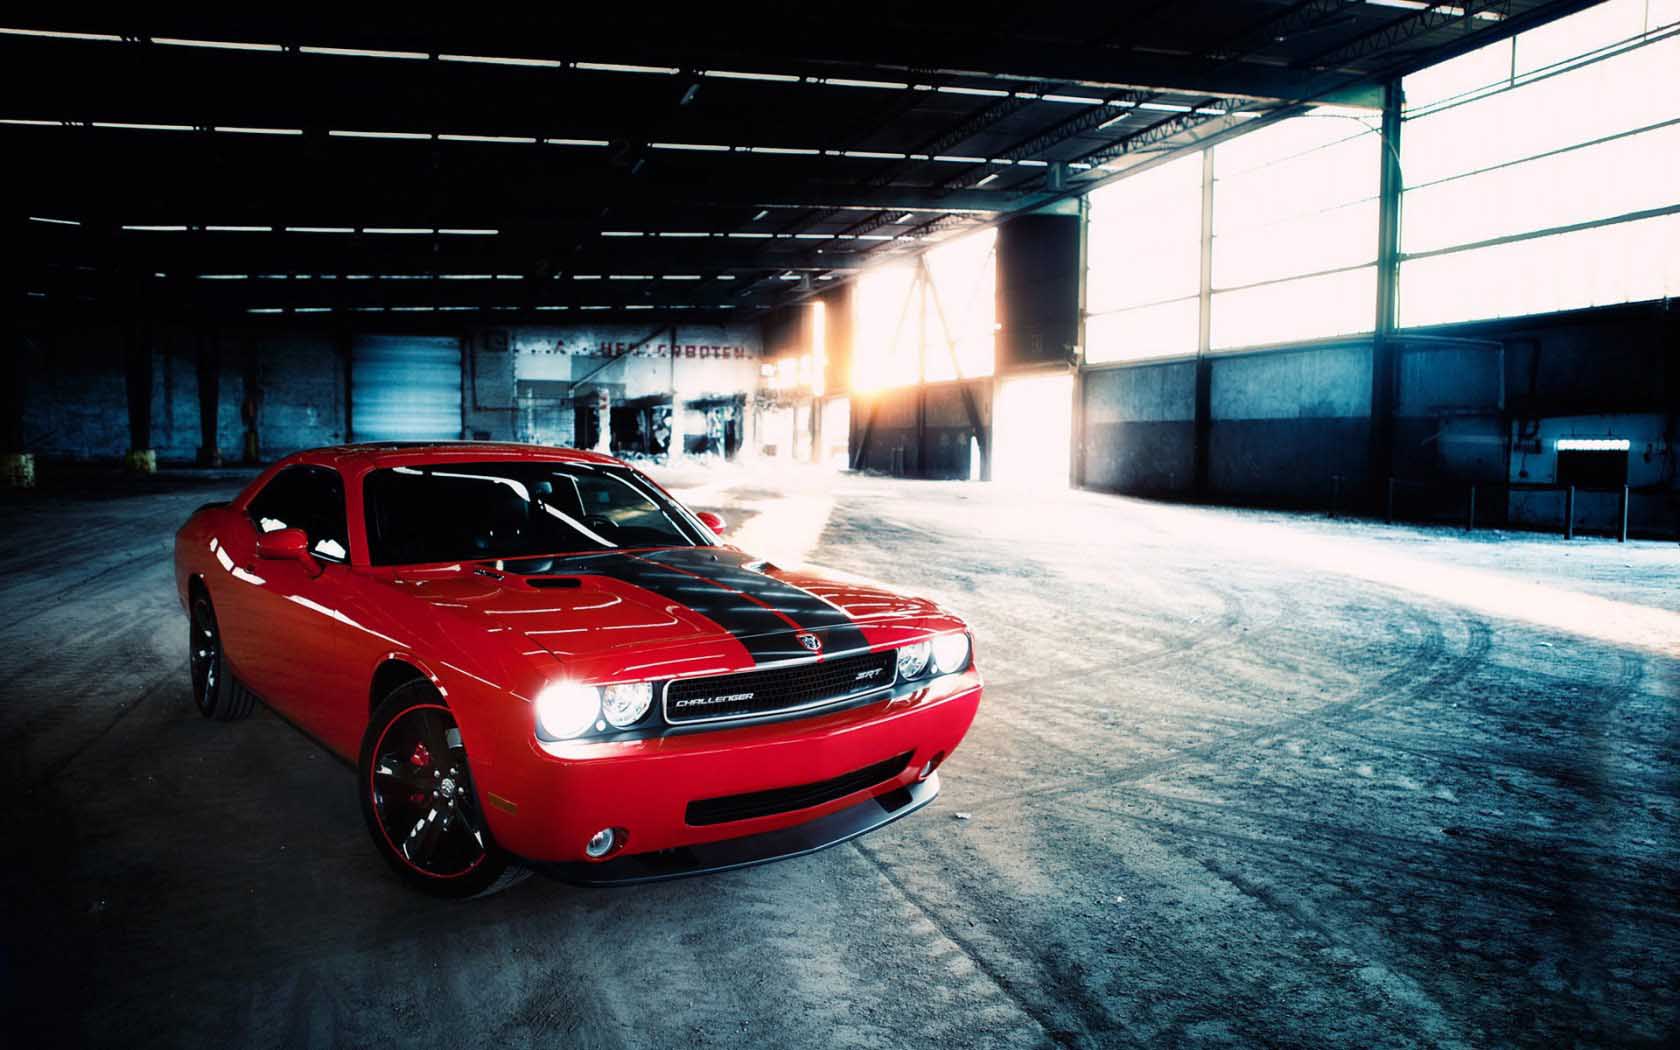 Latest Dodge Challenger Wallpapers In HD From 2015 Gallery